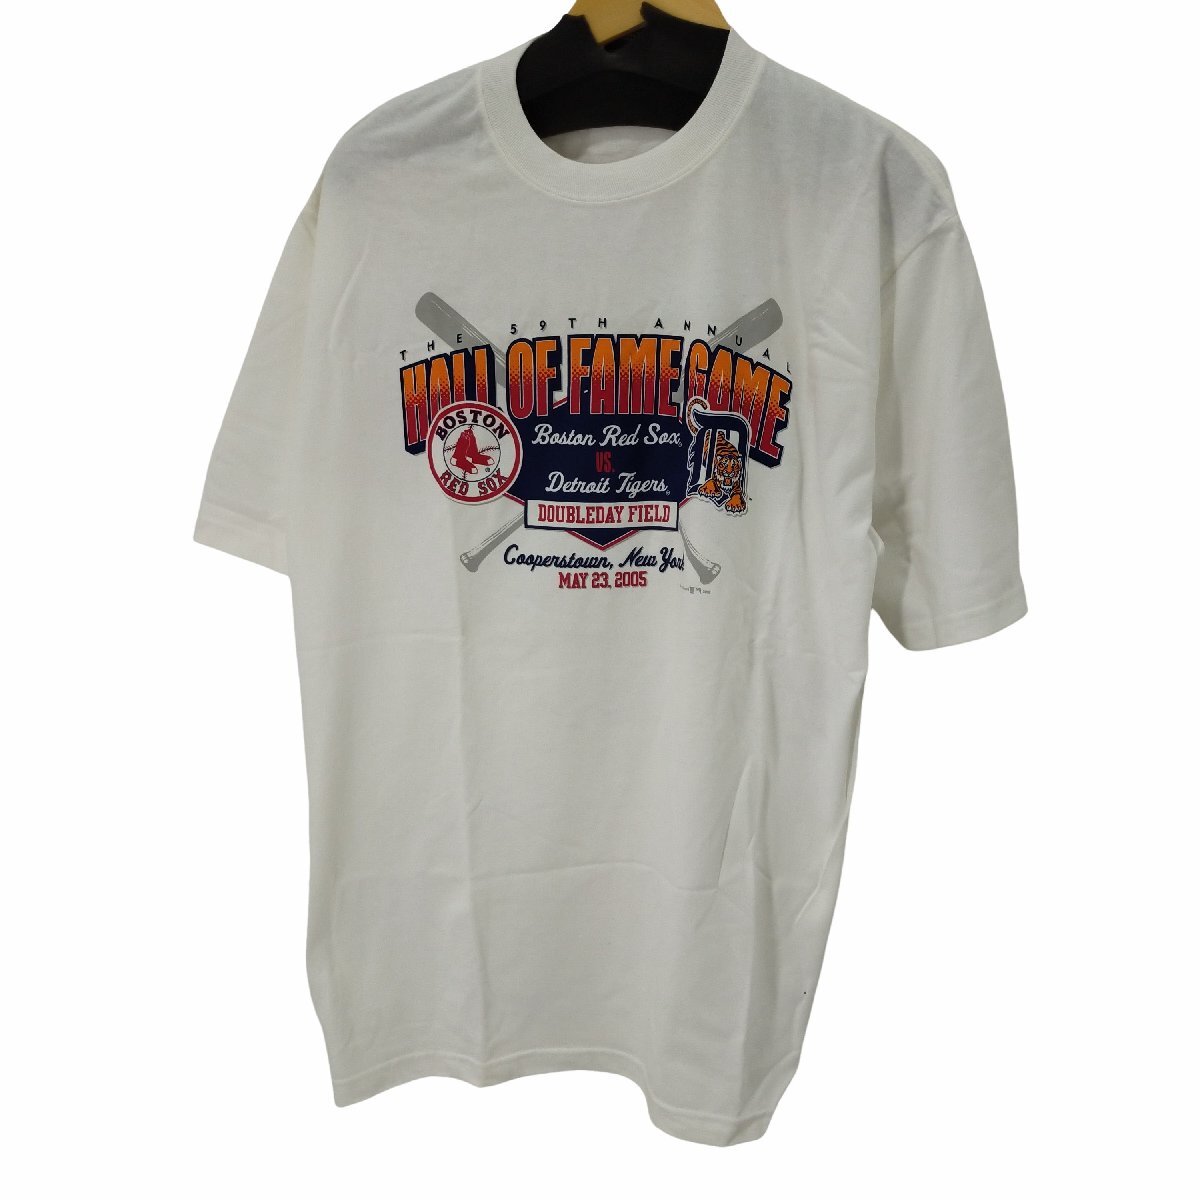 USED古着(ユーズドフルギ) 00S HALL OF FAME GAME BASEBALL Tシャツ メ 中古 古着 0309_画像1